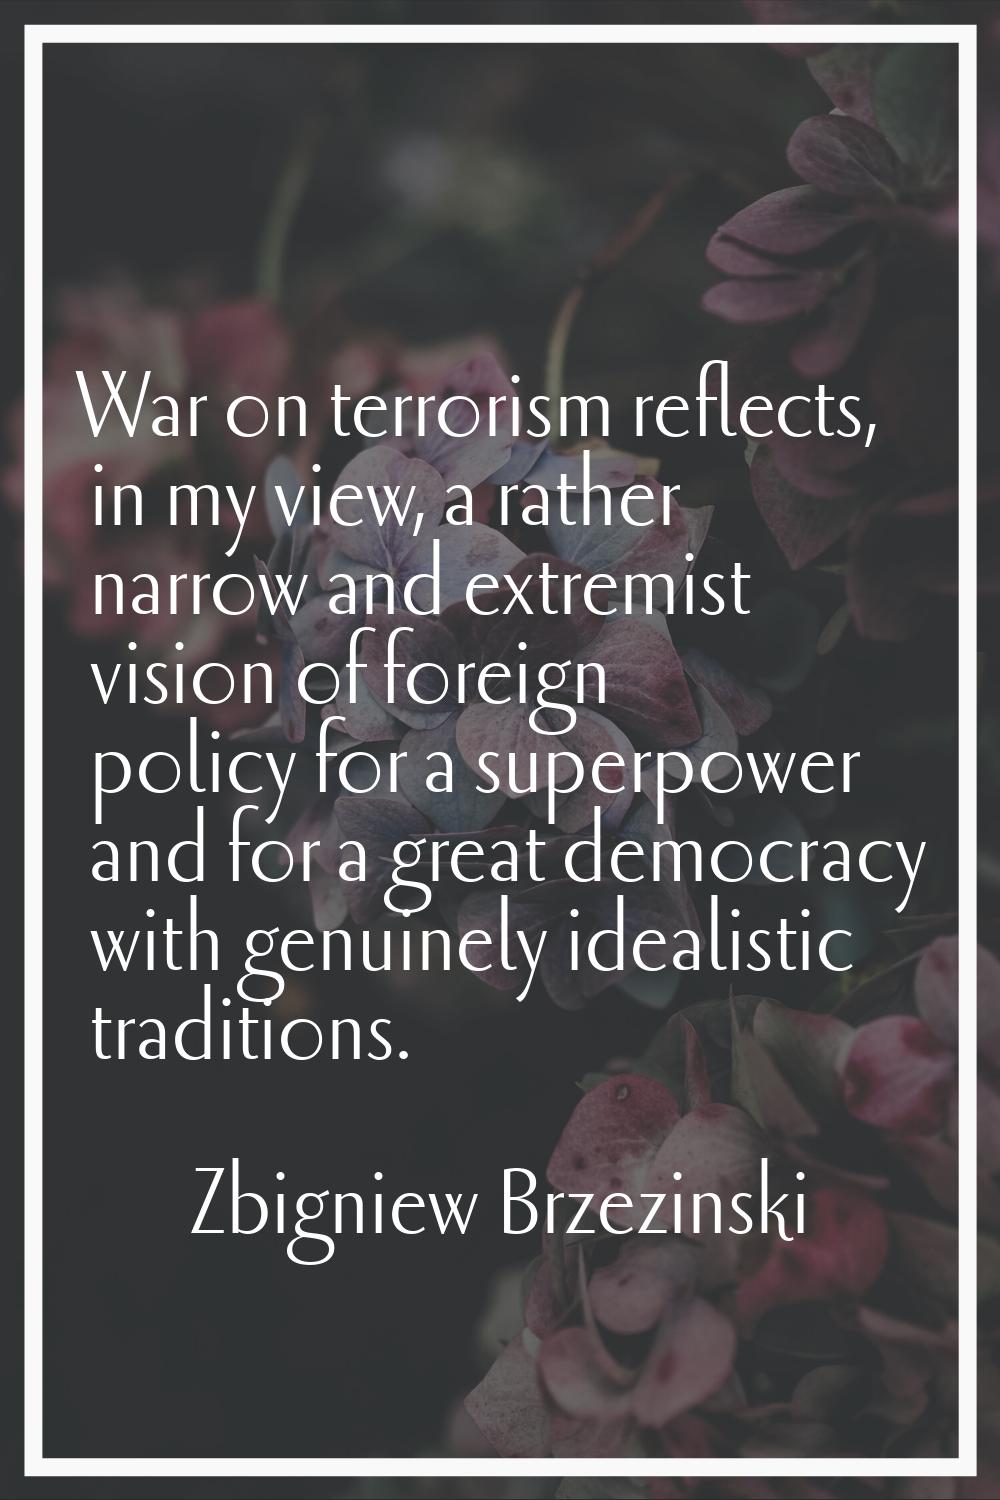 War on terrorism reflects, in my view, a rather narrow and extremist vision of foreign policy for a